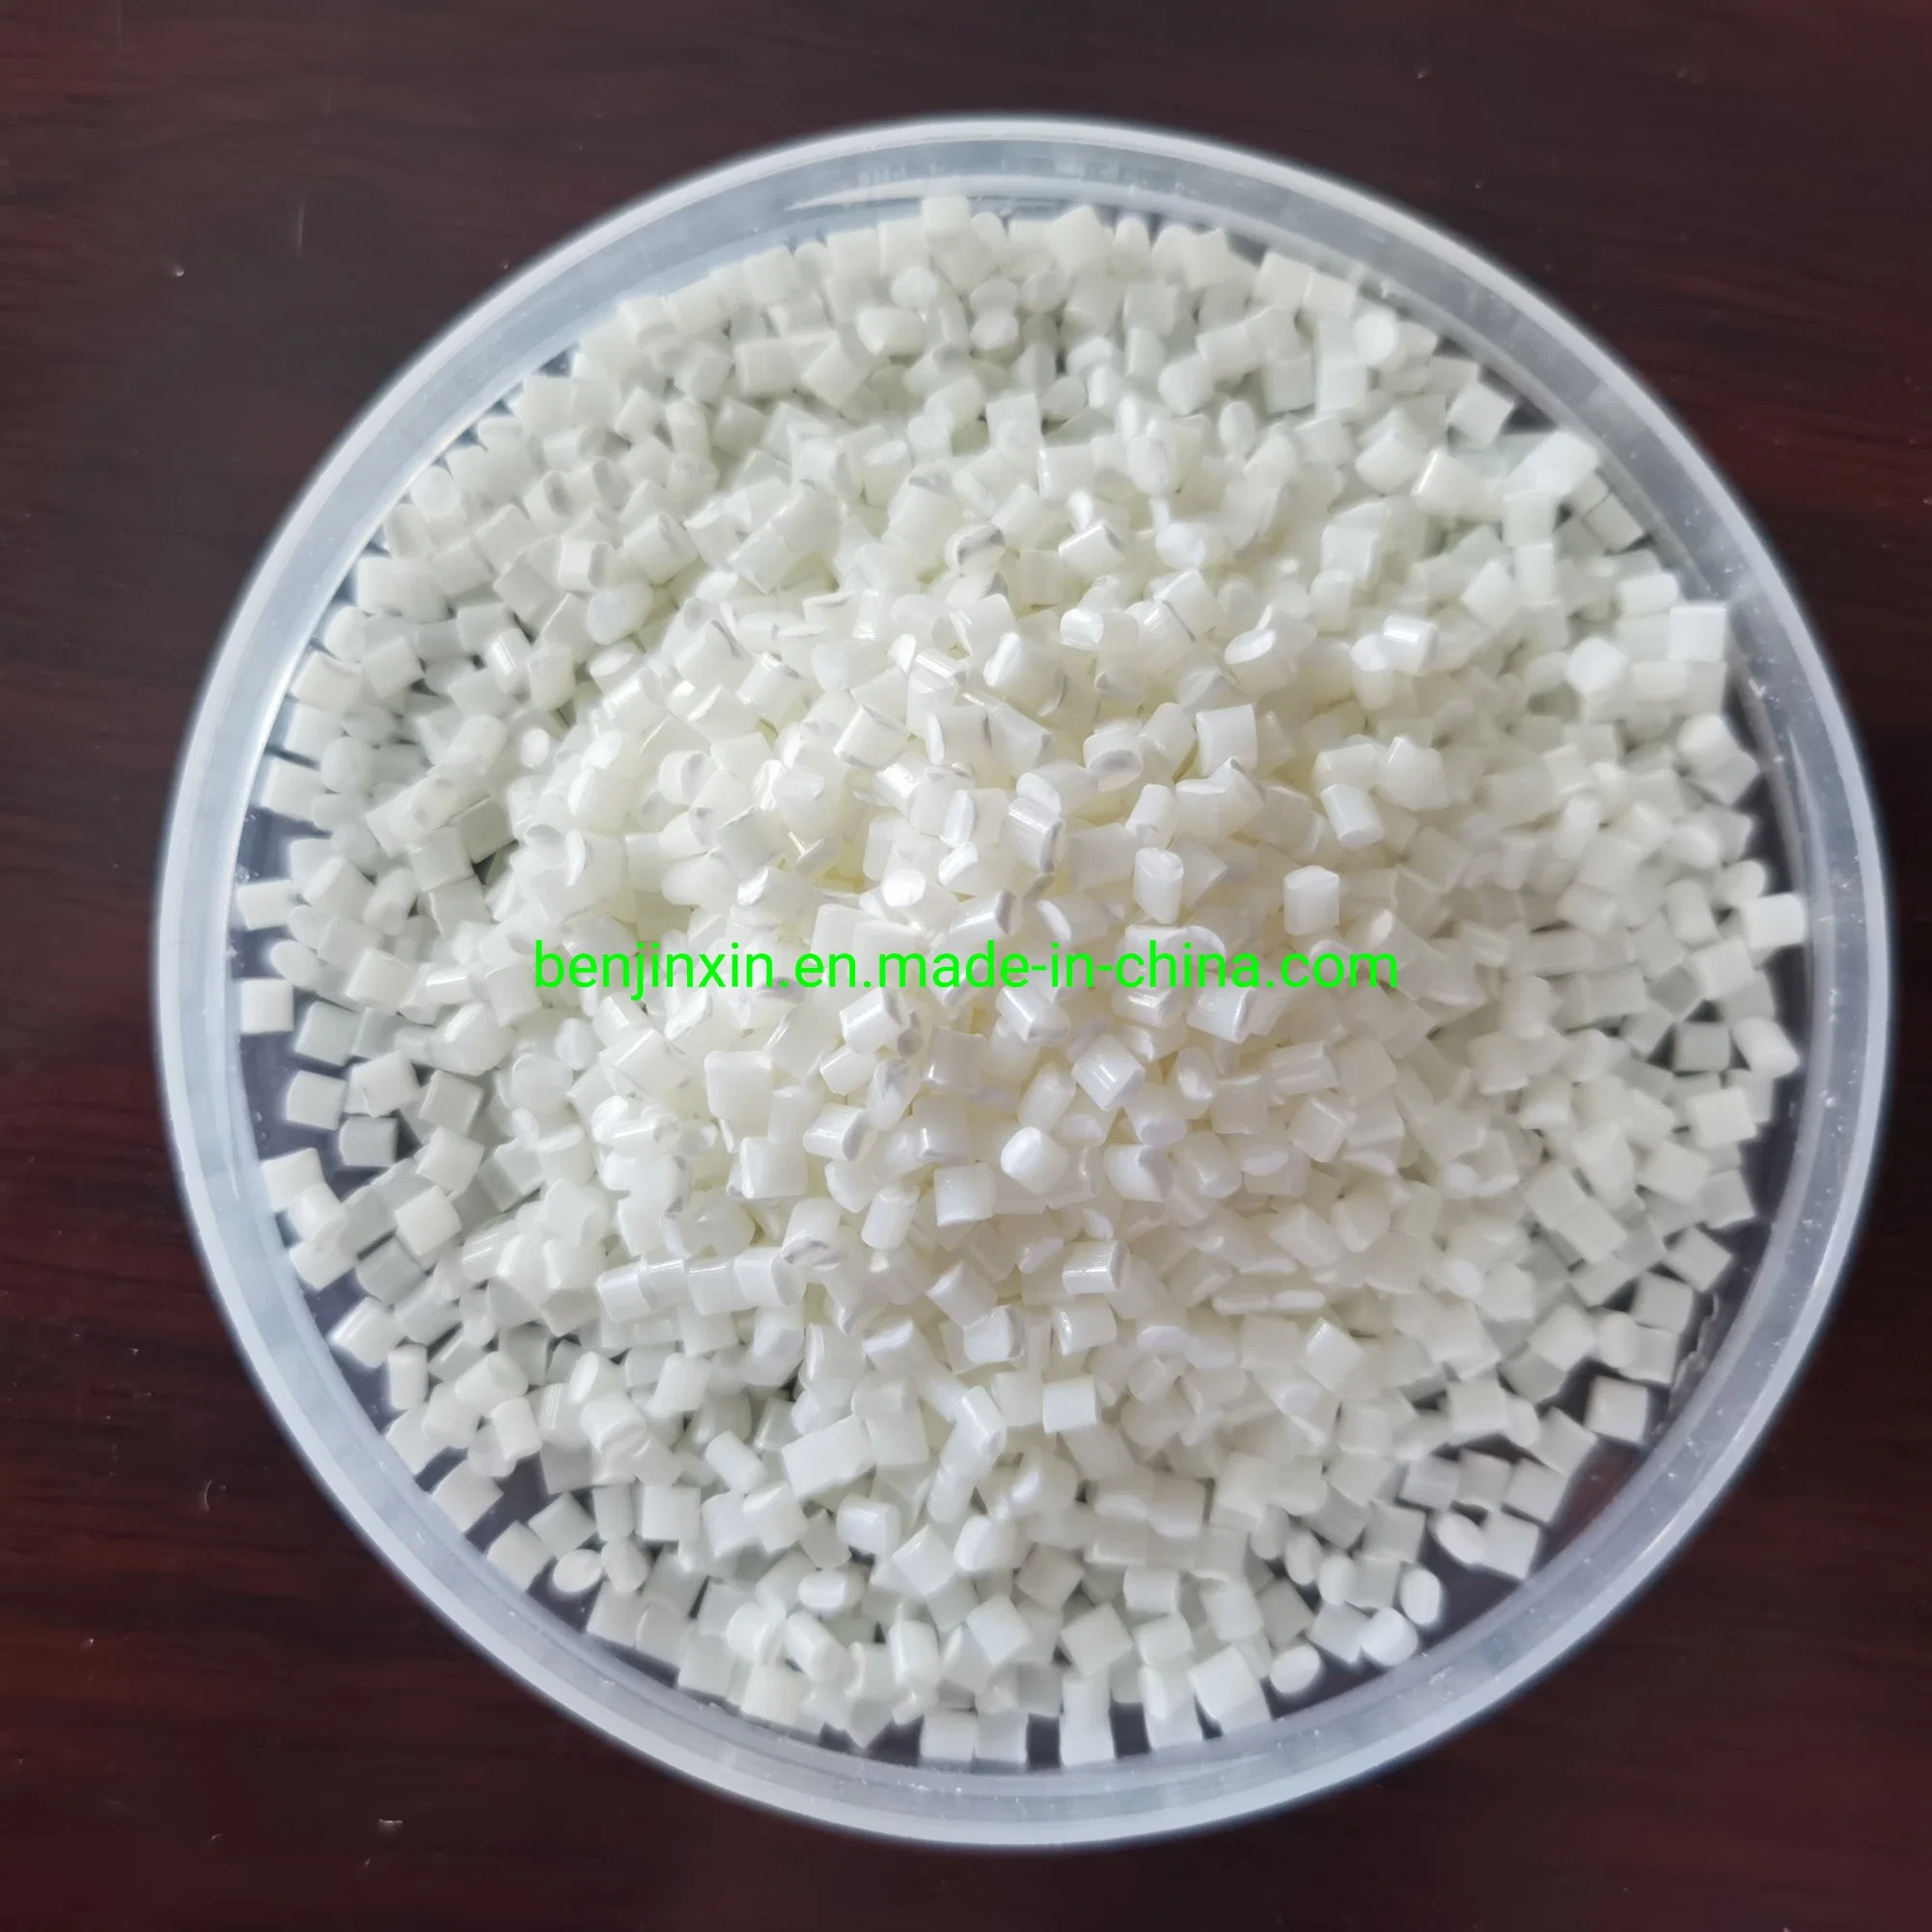 High Quality Recycled/Reprocessed Black ABS/Acrylonitrile Butadiene Styrene Plastic Granules for Sale/ABS